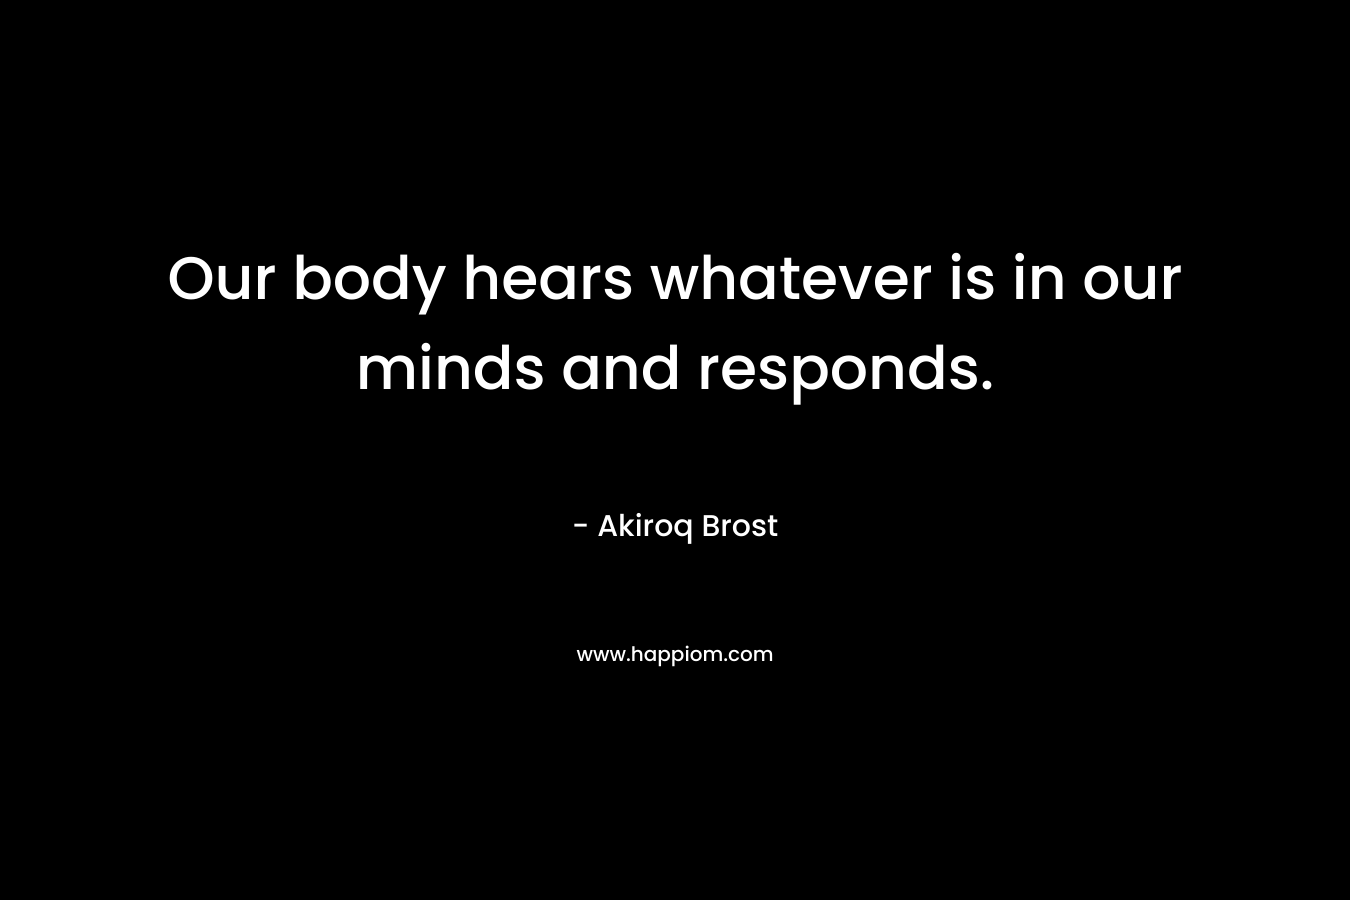 Our body hears whatever is in our minds and responds.